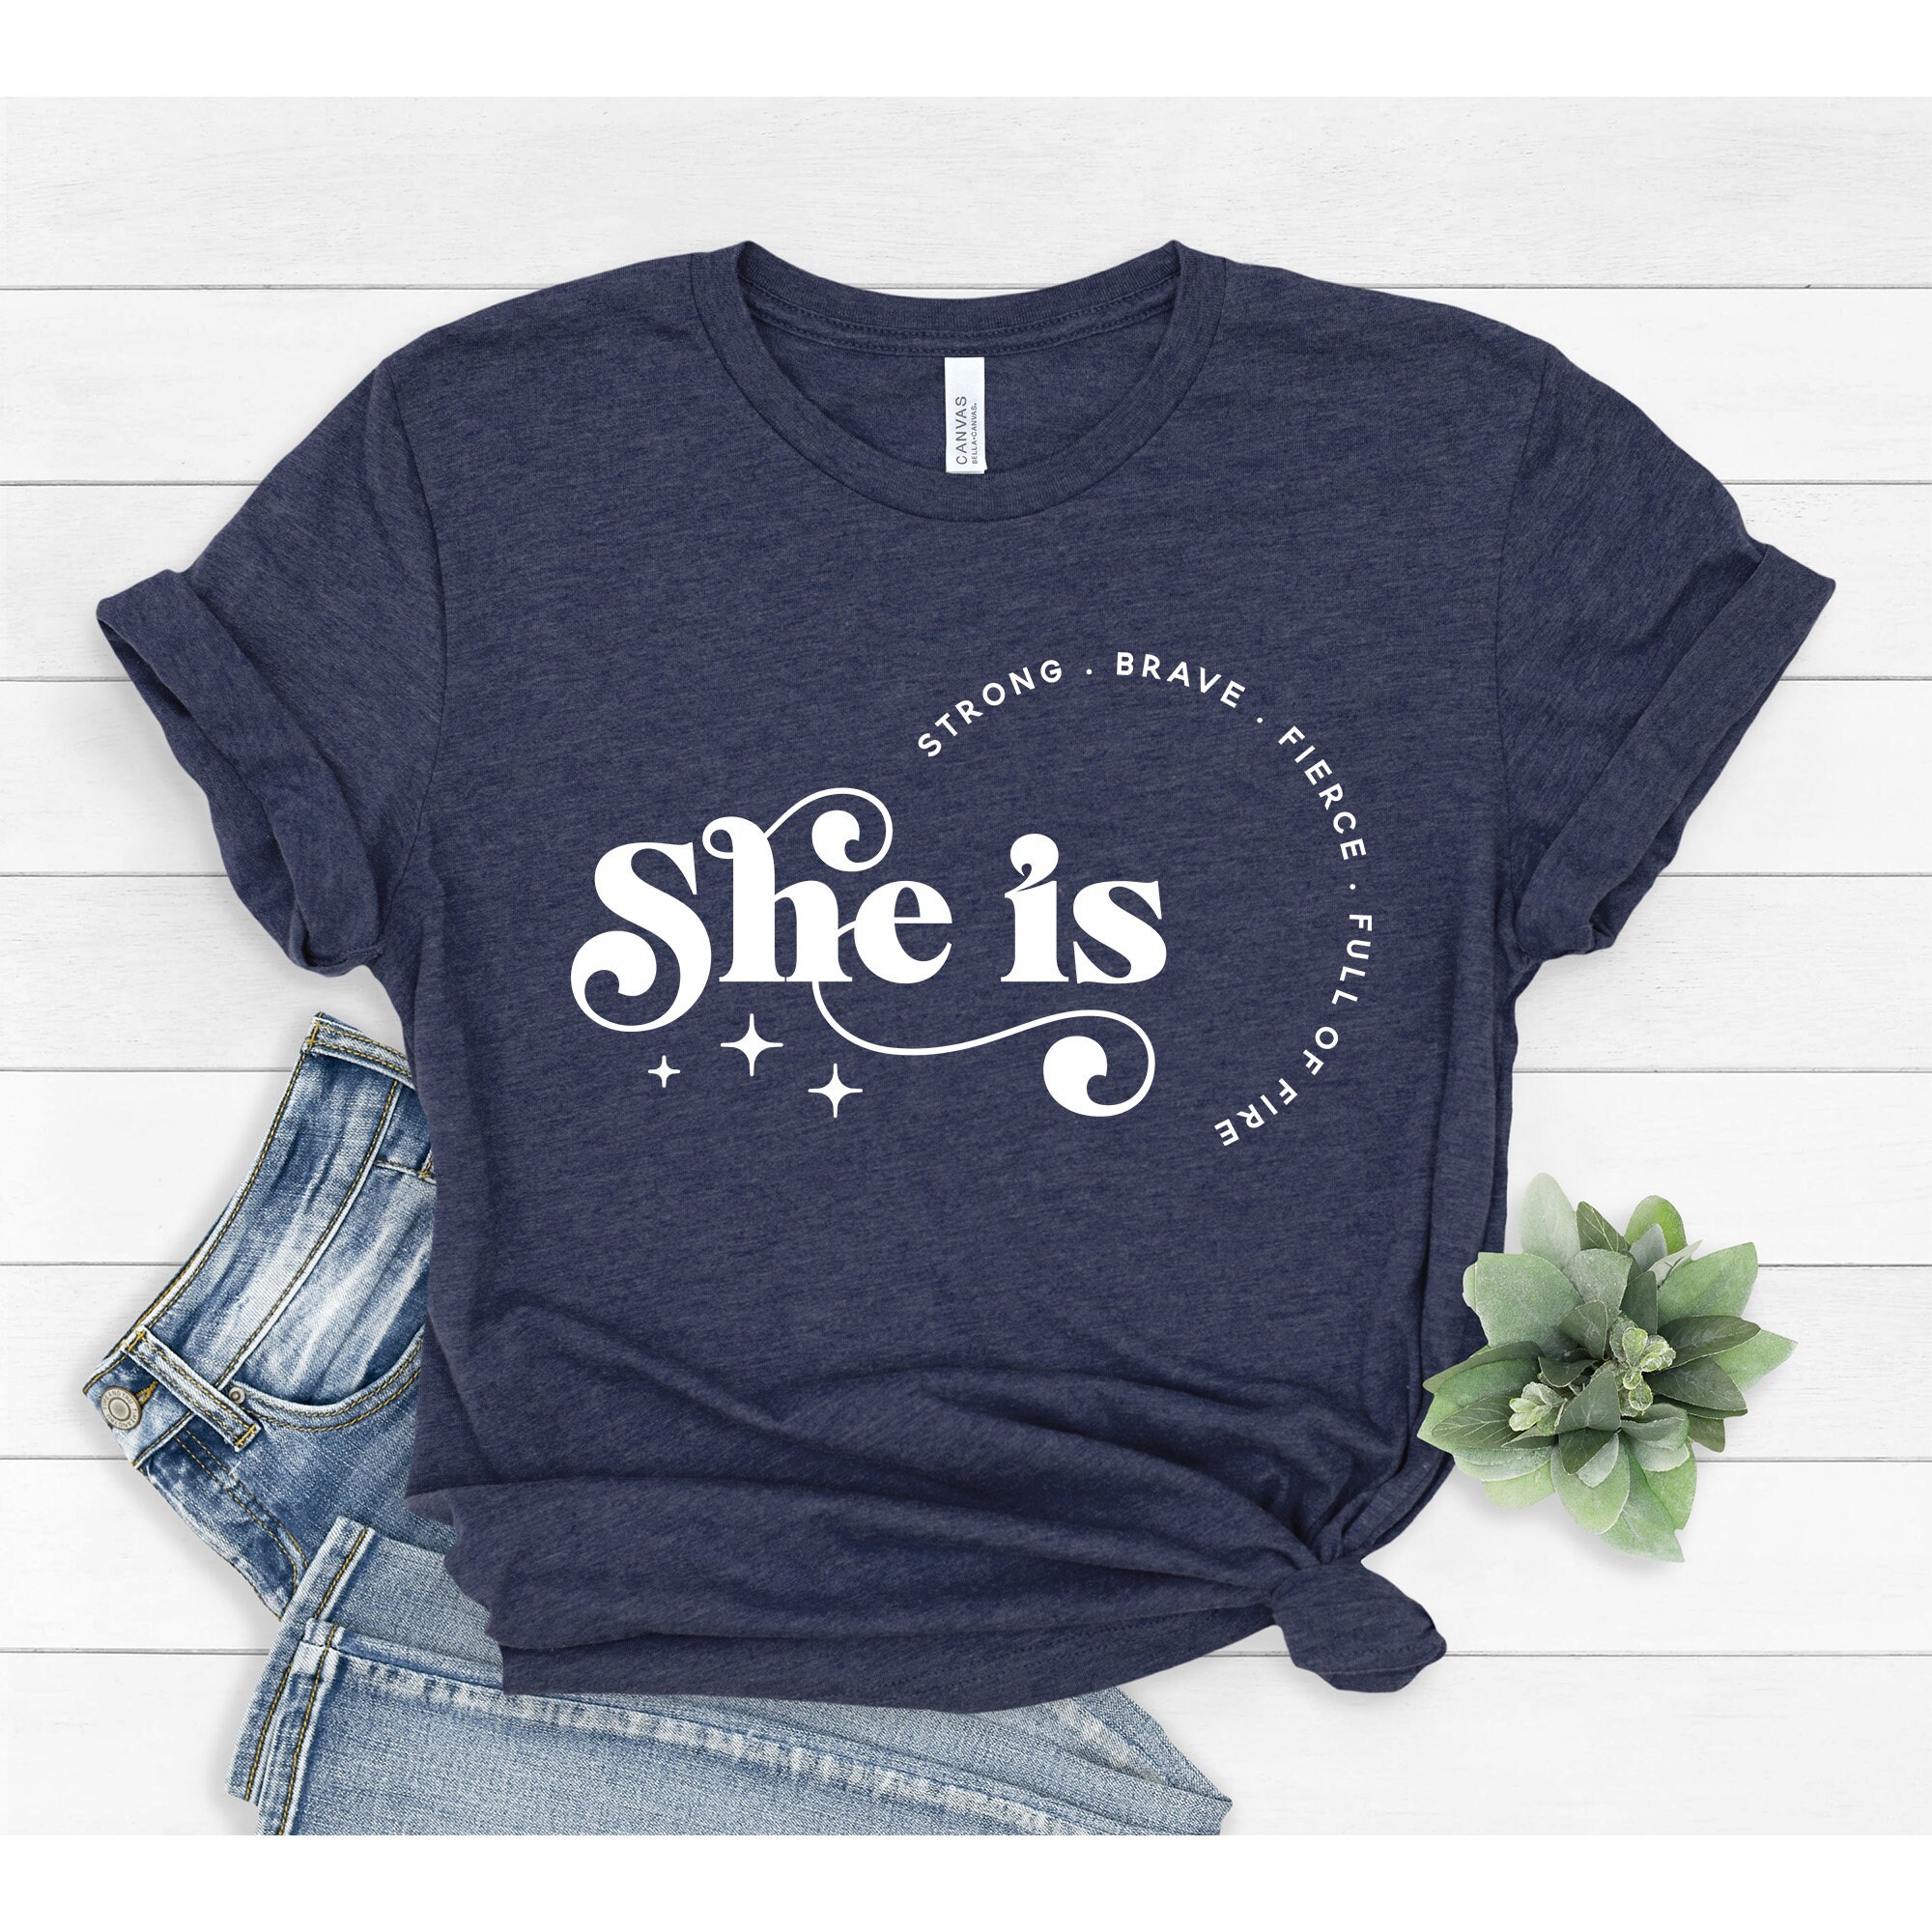 She is Fierce Strong Brave Full of Fire T-shirt Empowered - Etsy